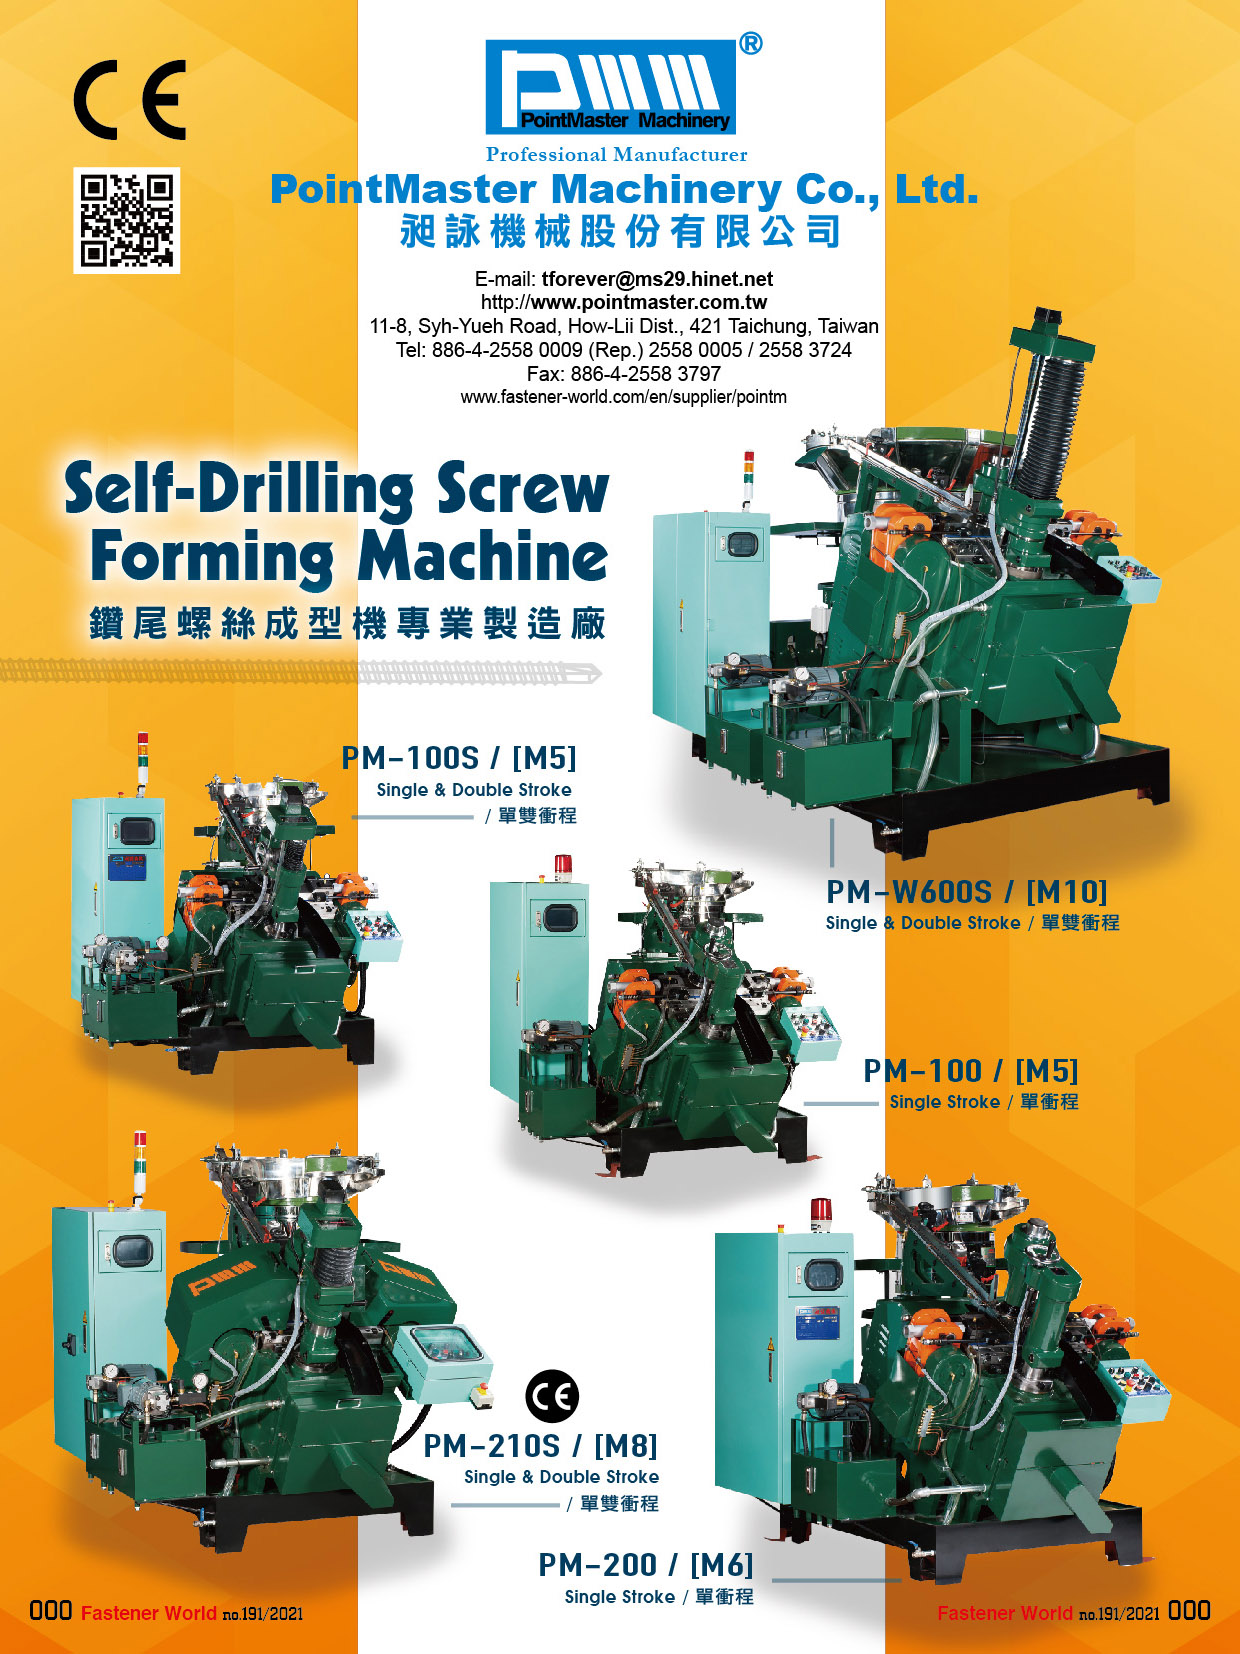 POINTMASTER MACHINERY CO., LTD.  , Self-Drilling Screw Forming Machine